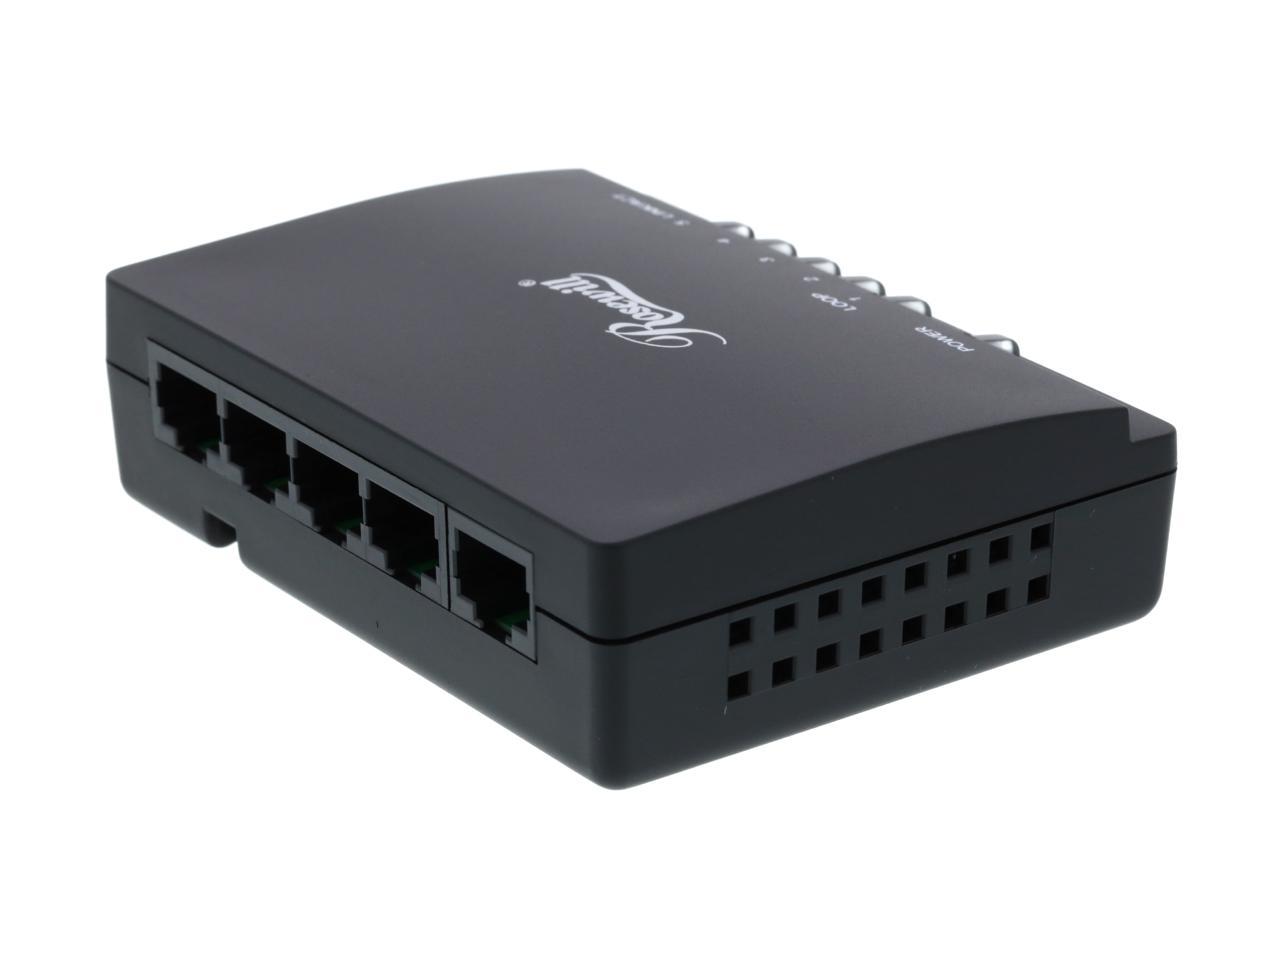 Rosewill 5 Port Gigabit Network Switch / Ethernet Switch / Desktop Switch  with 9K Jumbo Frame for Home and Small Business Users (RC-409LXv2)